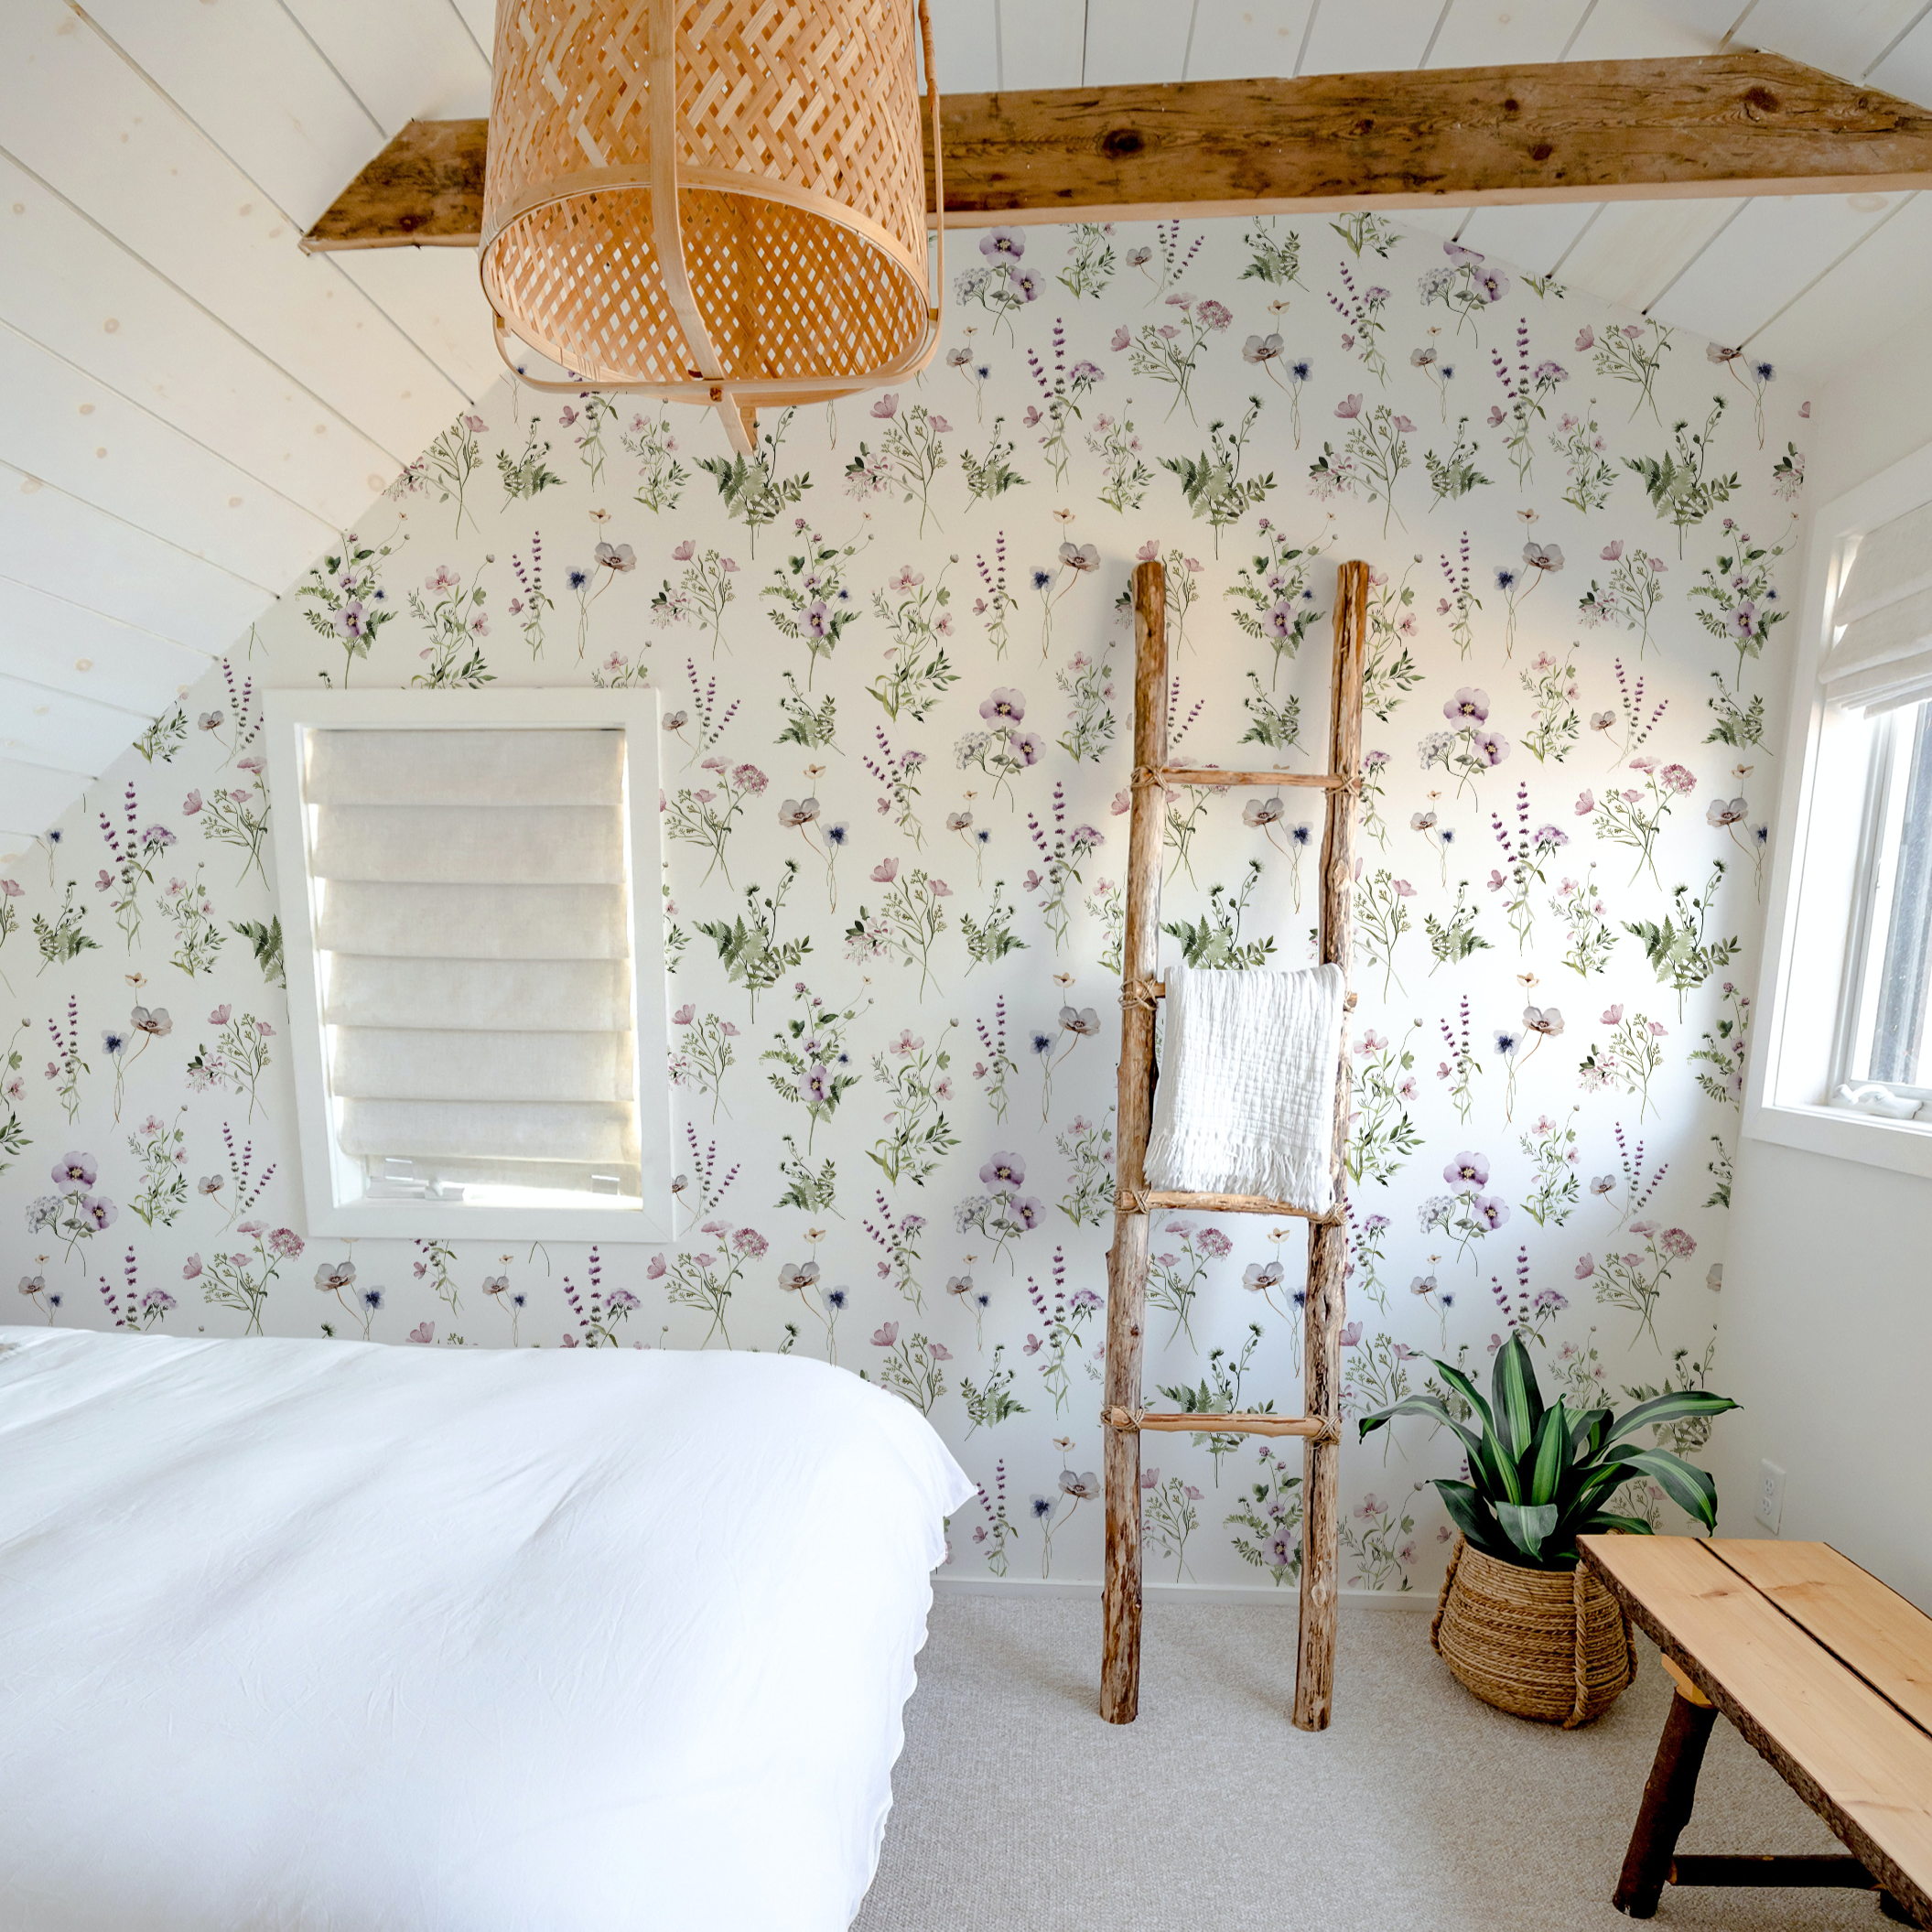 The 'Midsummer Watercolour Bouquet Wallpaper - Raspberry' enhances the bright and airy ambiance of a bedroom, complemented by natural elements like a rustic ladder and woven light fixture, creating a charming and restful space.